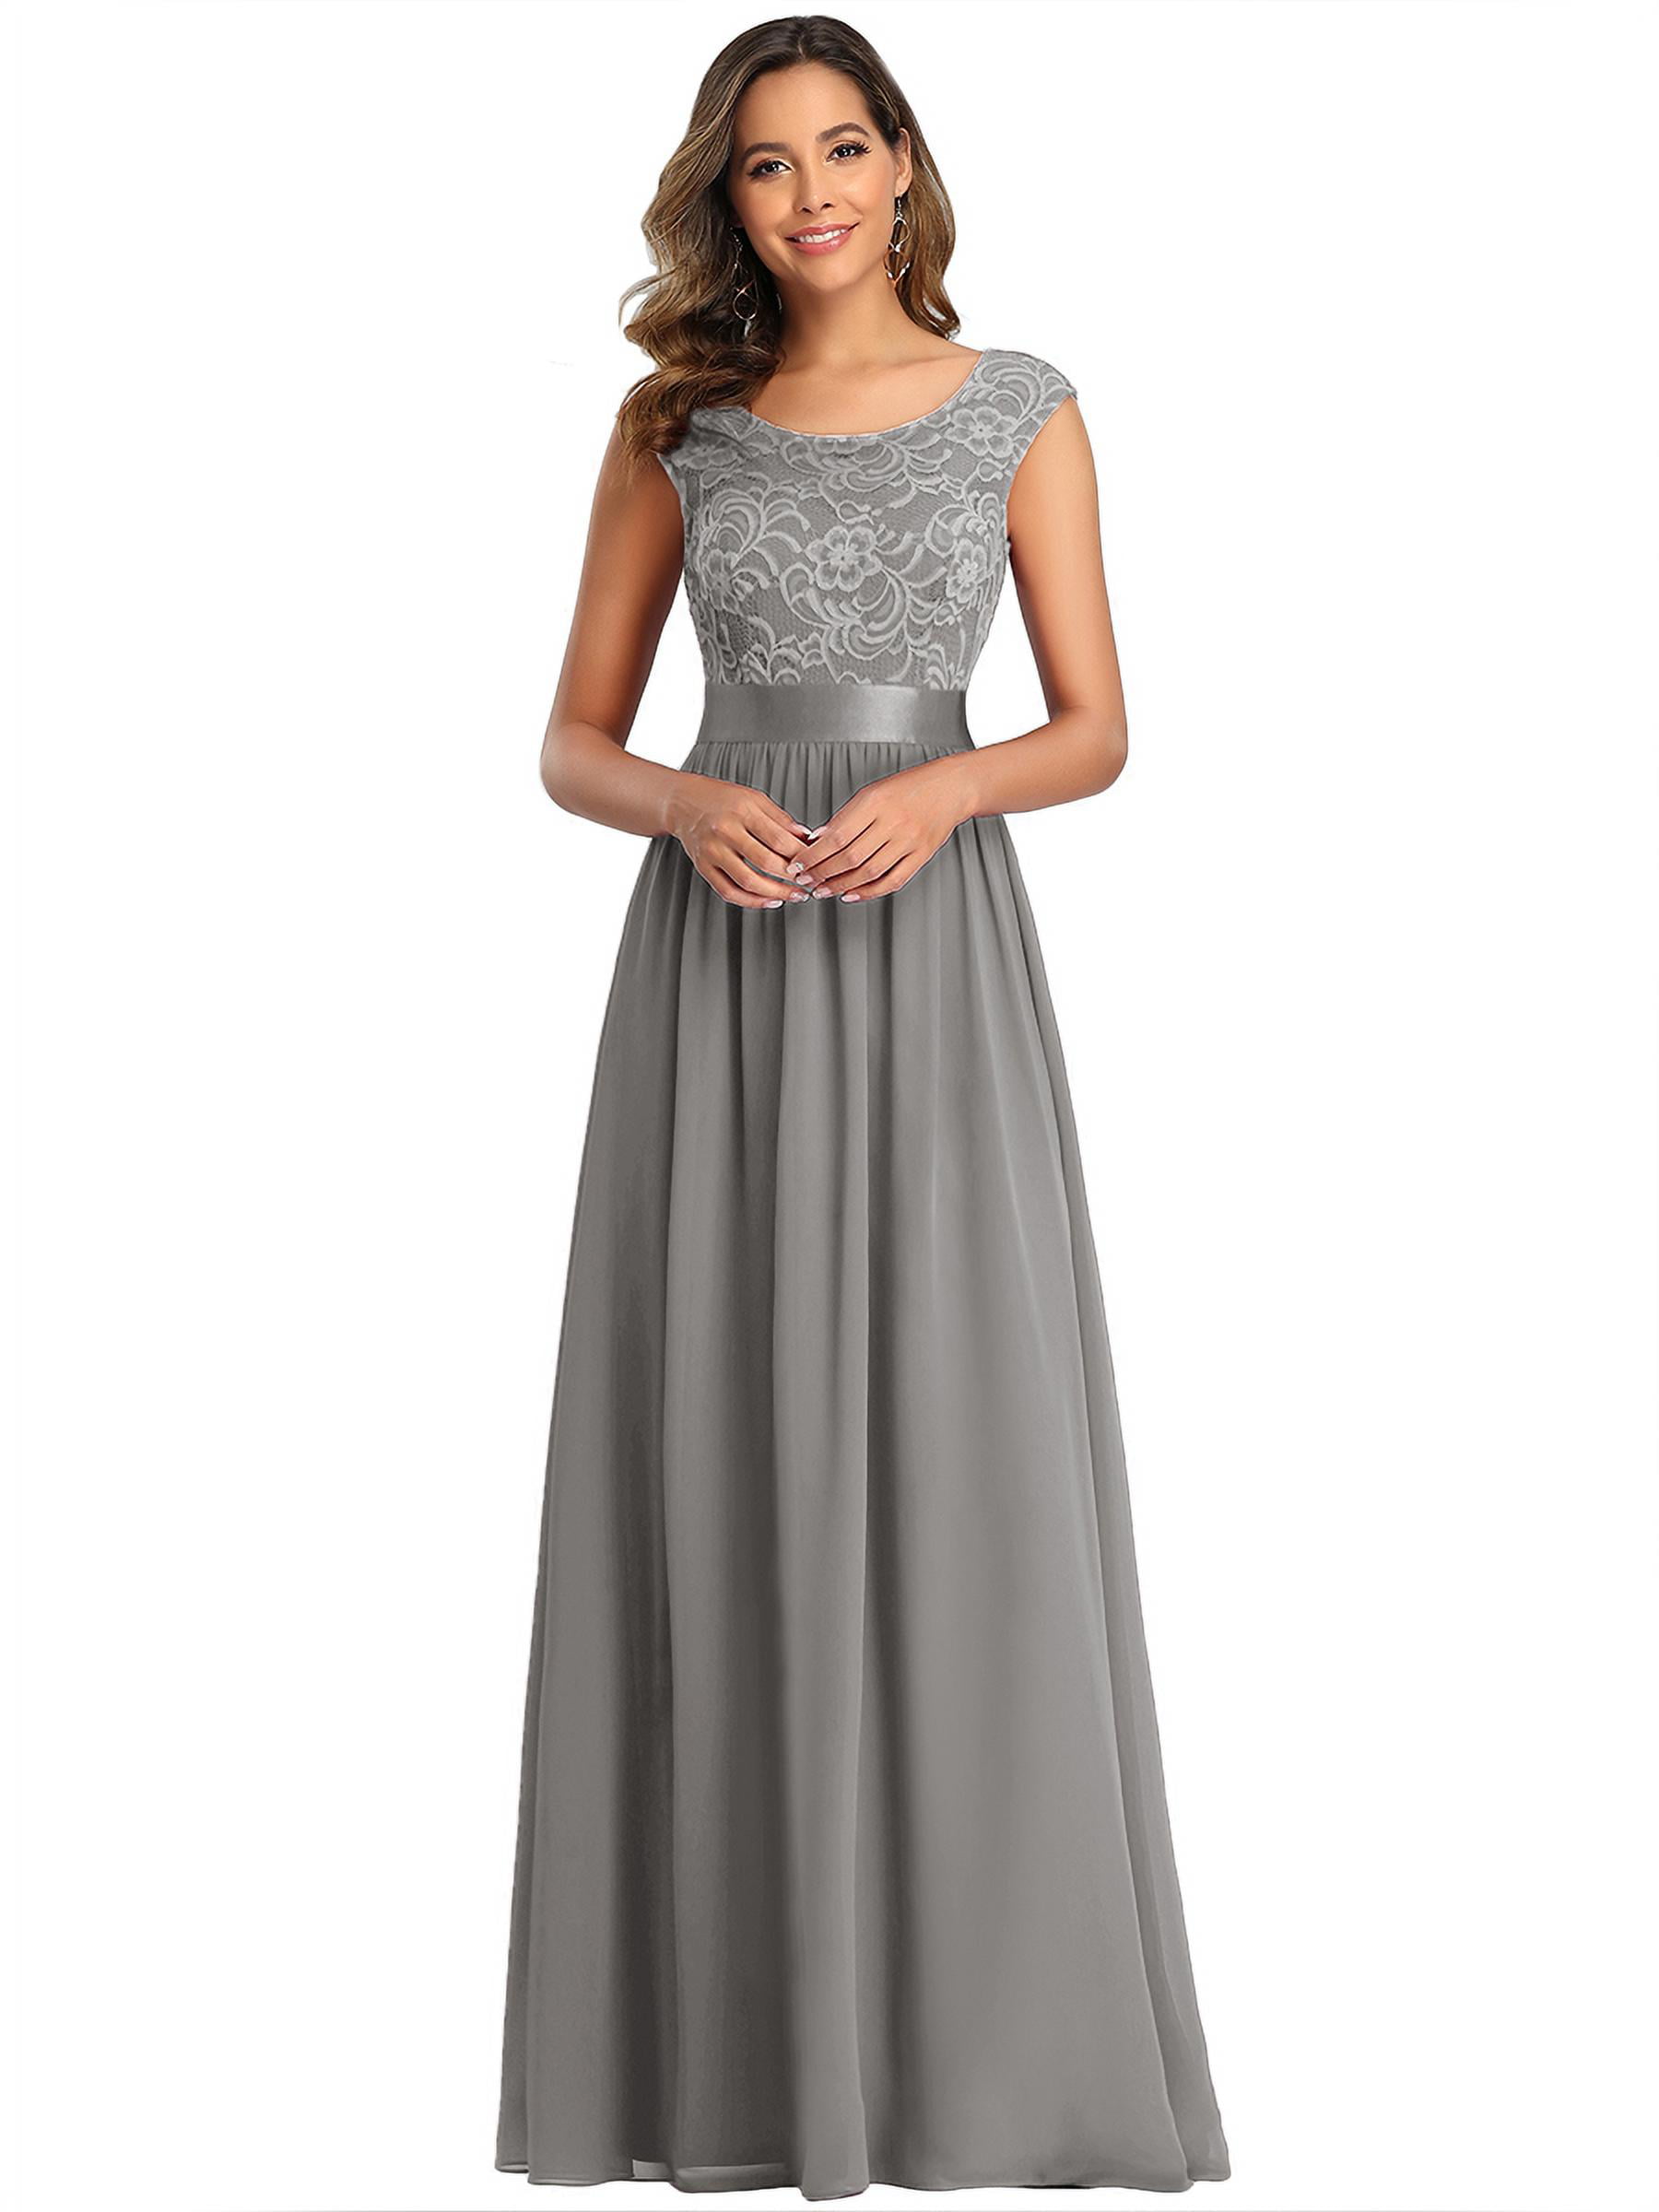 Long Chiffon Bridesmaid Formal Gown Ball Party Dress Cocktail Evening Prom 6-30 